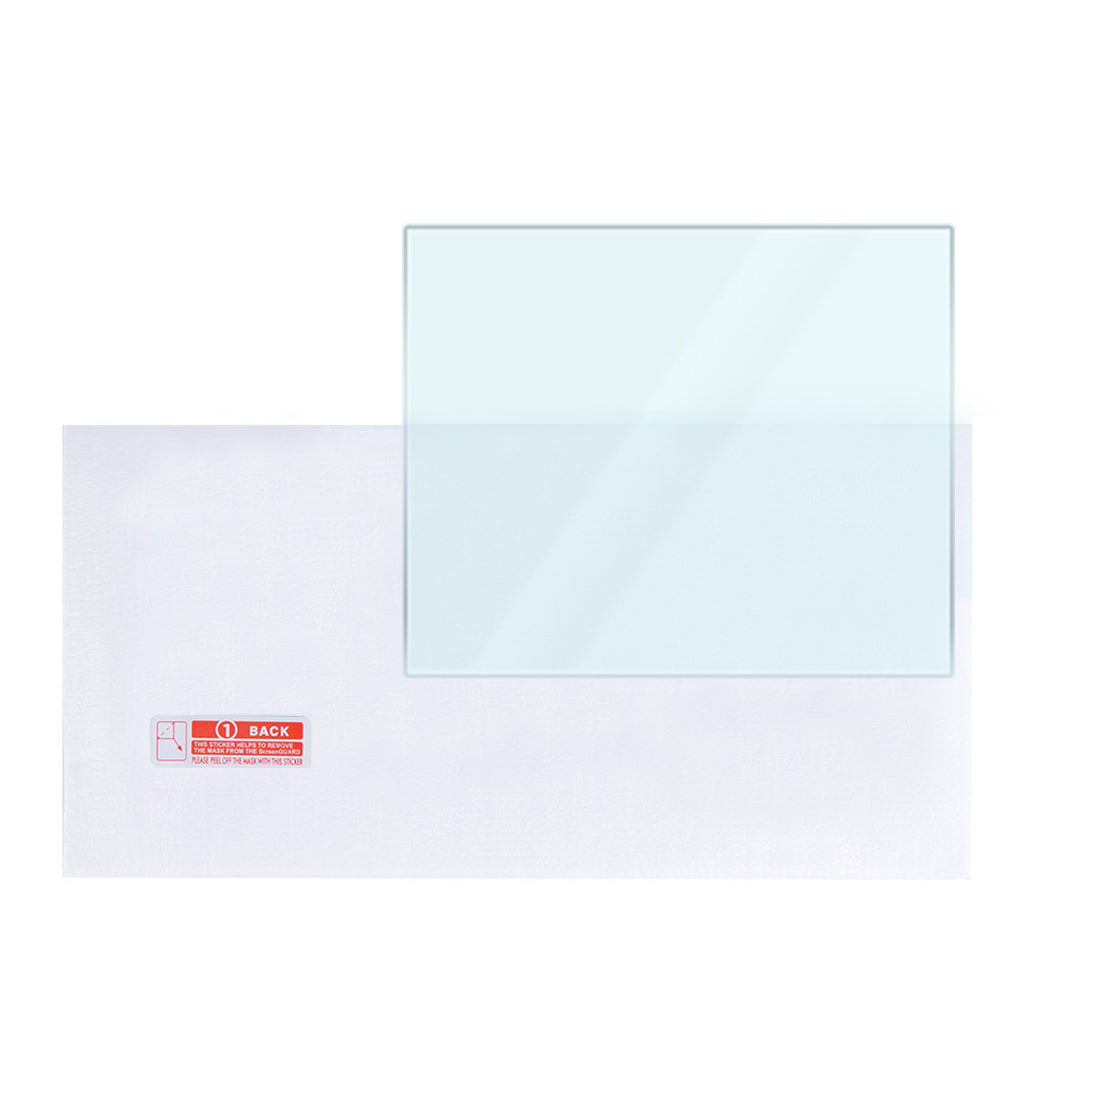 Tempered Glass Screen Protector for Powkiddy RGB30 Game Console